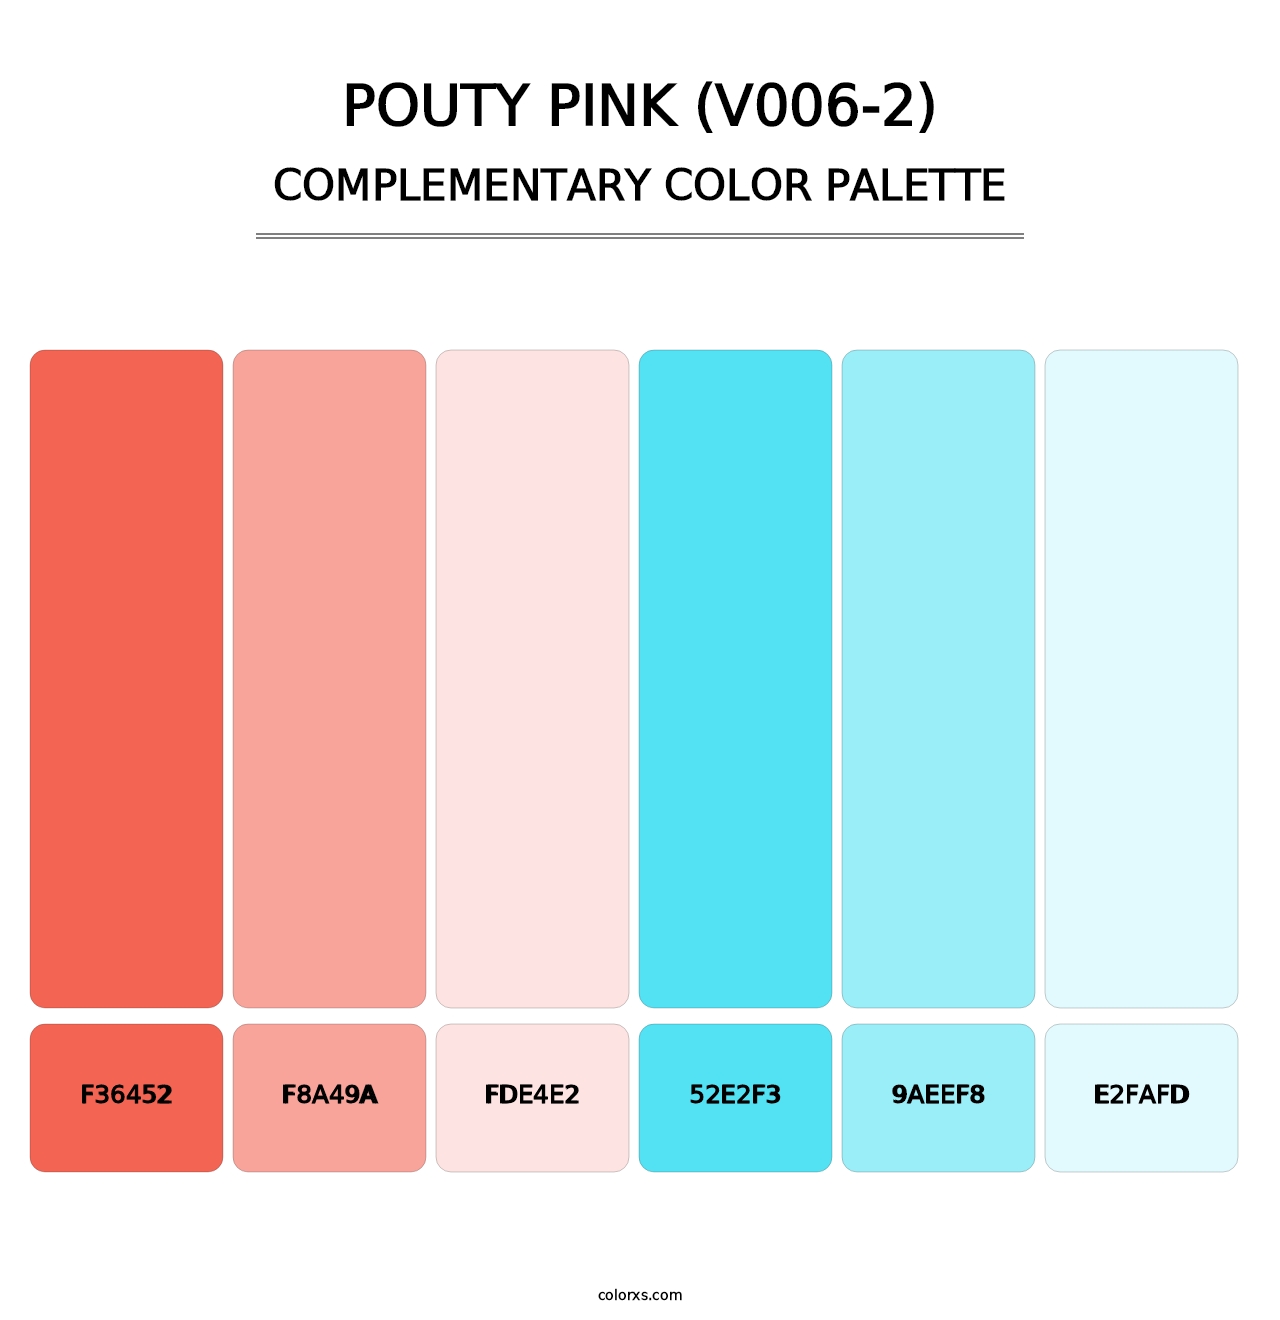 Pouty Pink (V006-2) - Complementary Color Palette